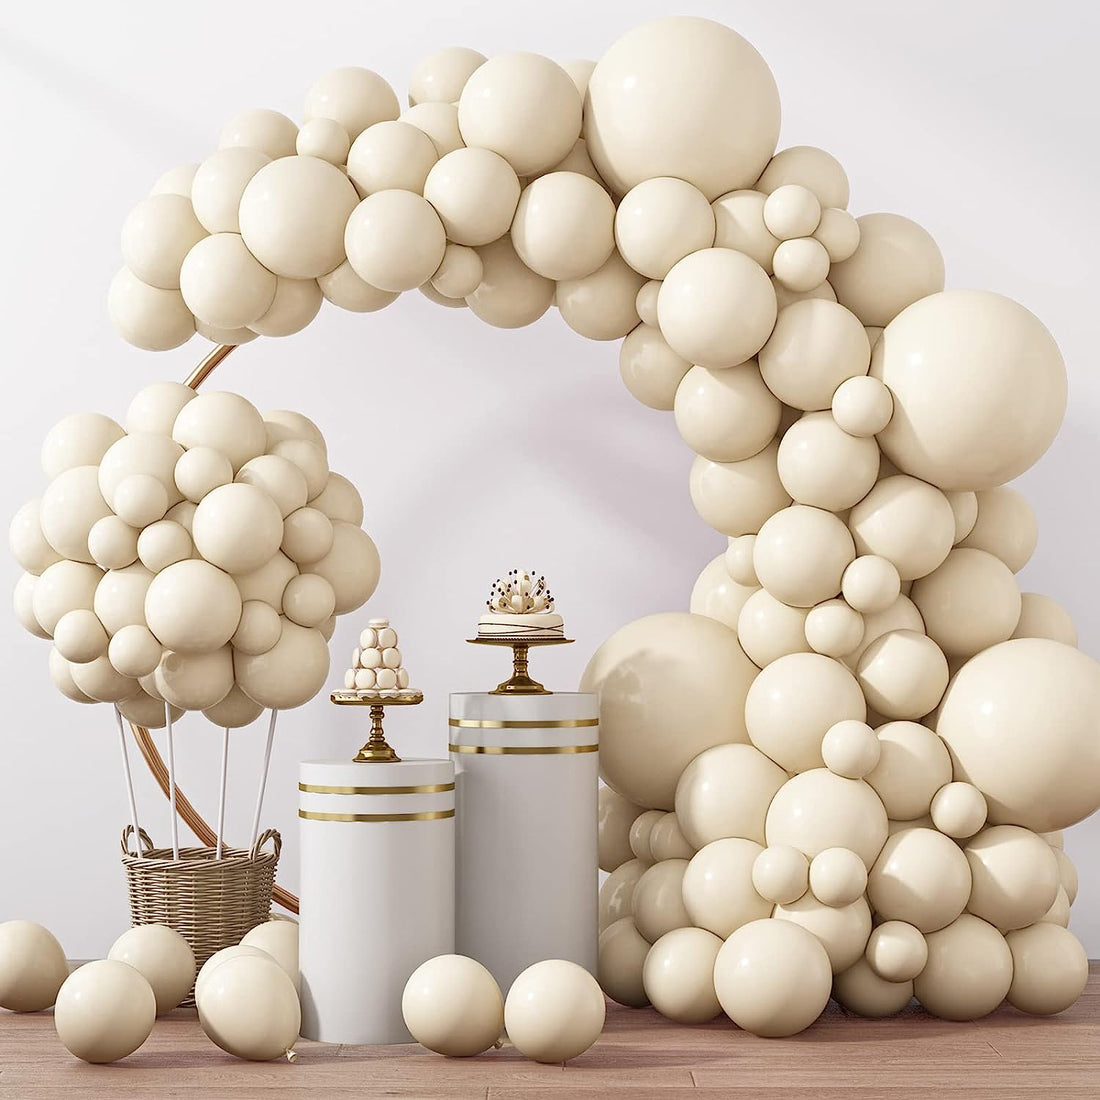 This is a wreath arch decoration set of sandy white balloons that is perfect for a variety of occasions including birthdays, weddings, anniversaries, Valentine&